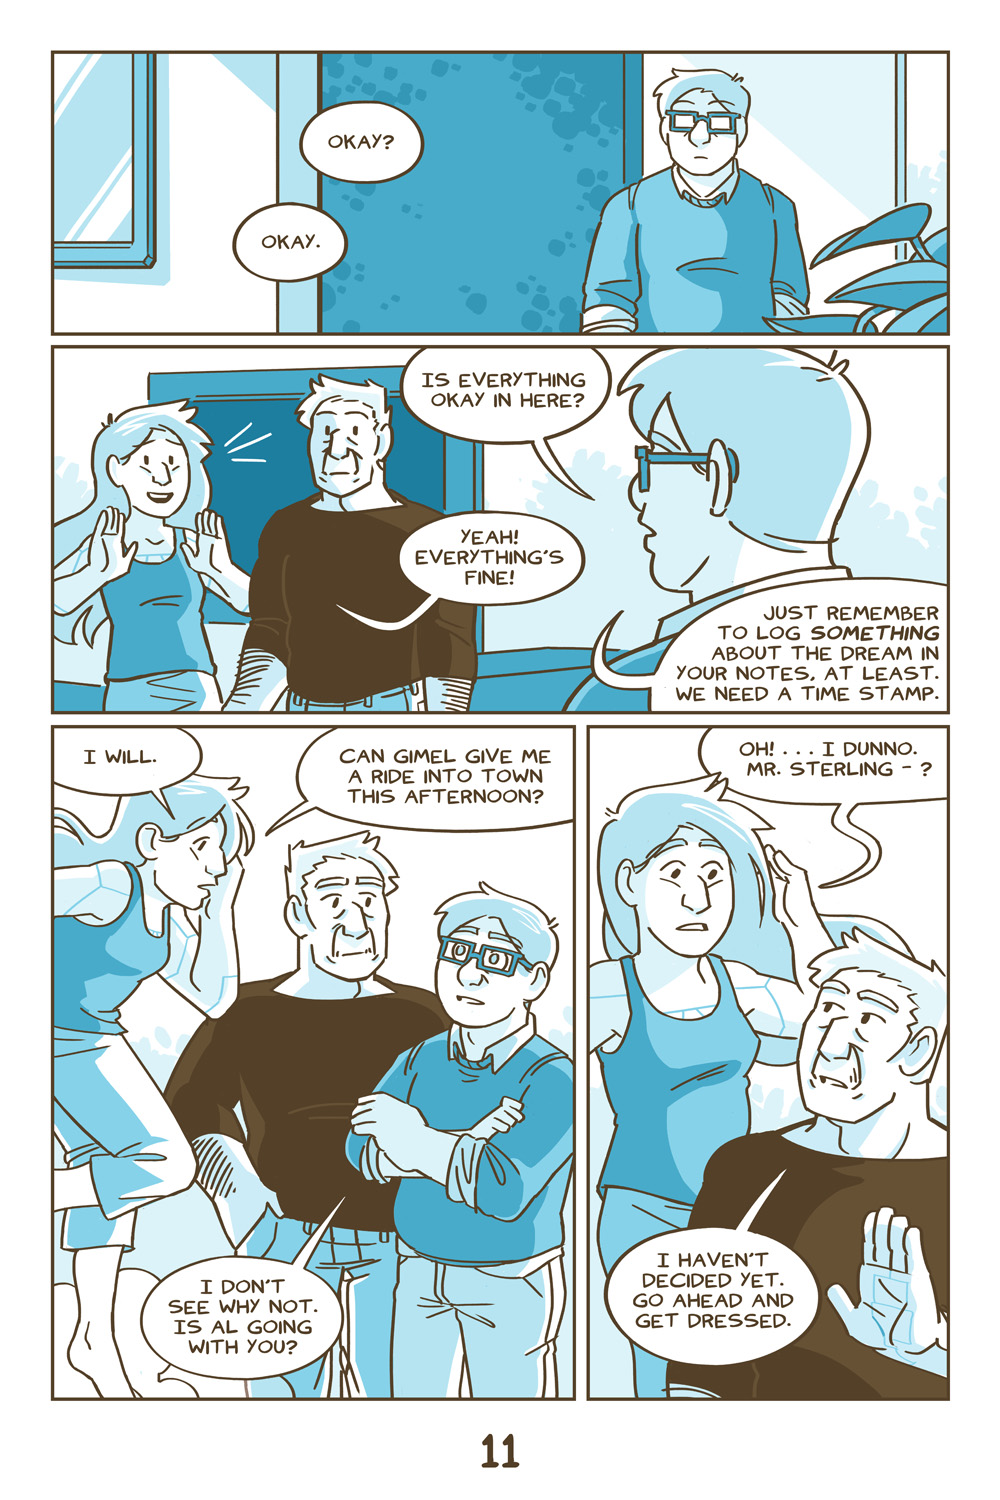 Chapter 4, Page 11